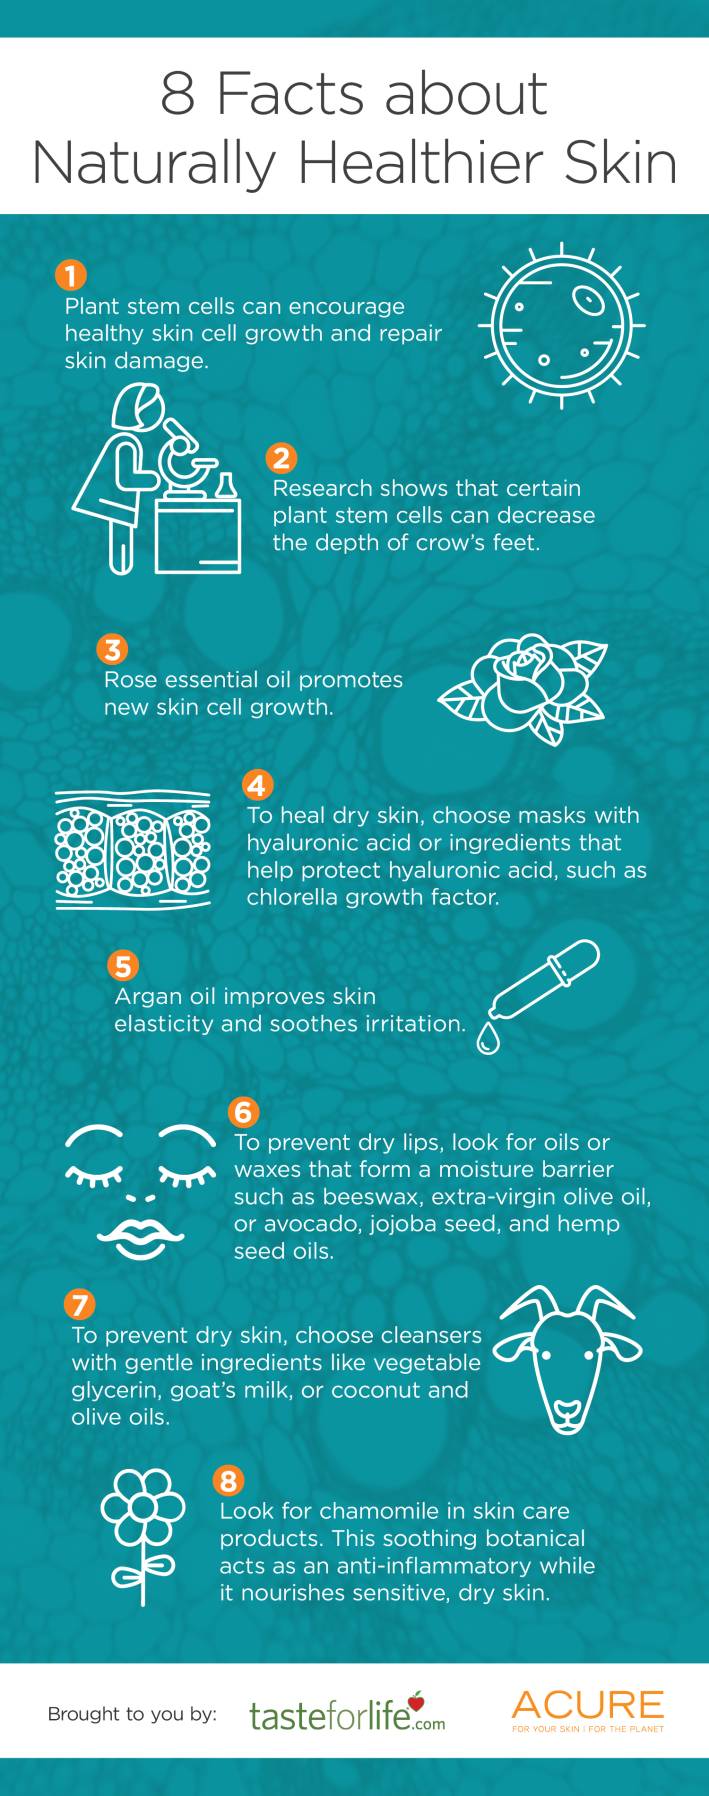 8 Facts about Naturally Healthier Skin